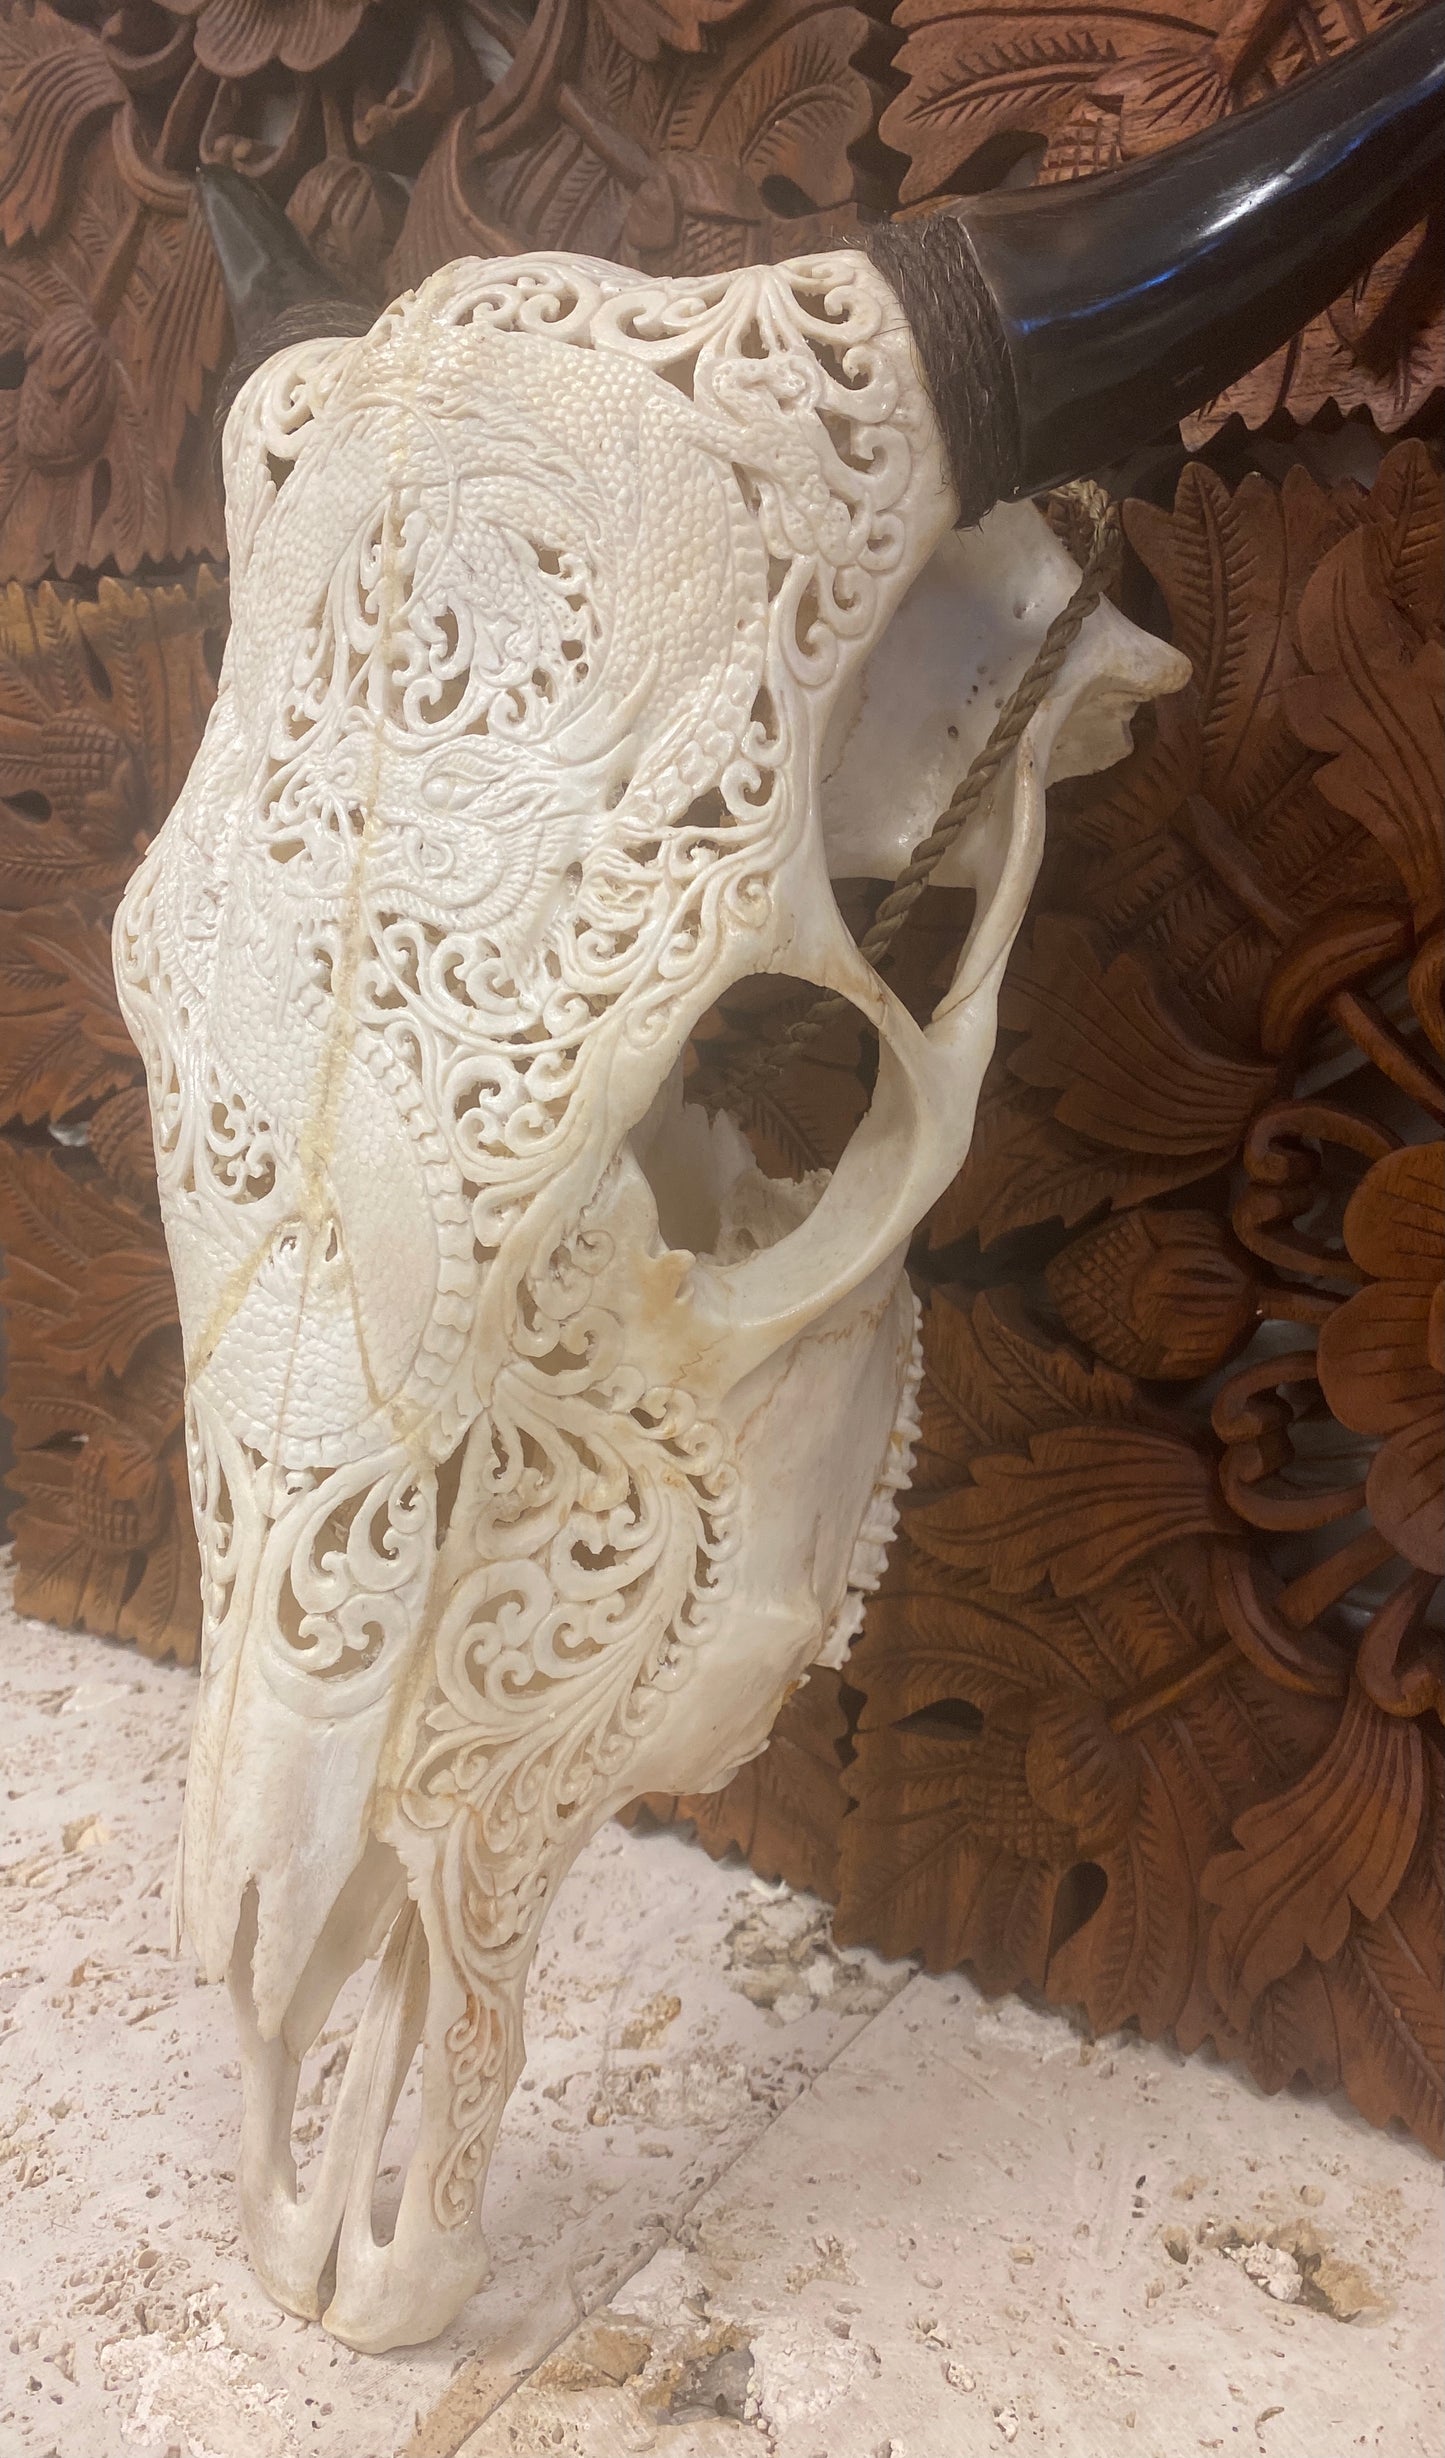 Intricately Carved Buffalo Skulls Dragons